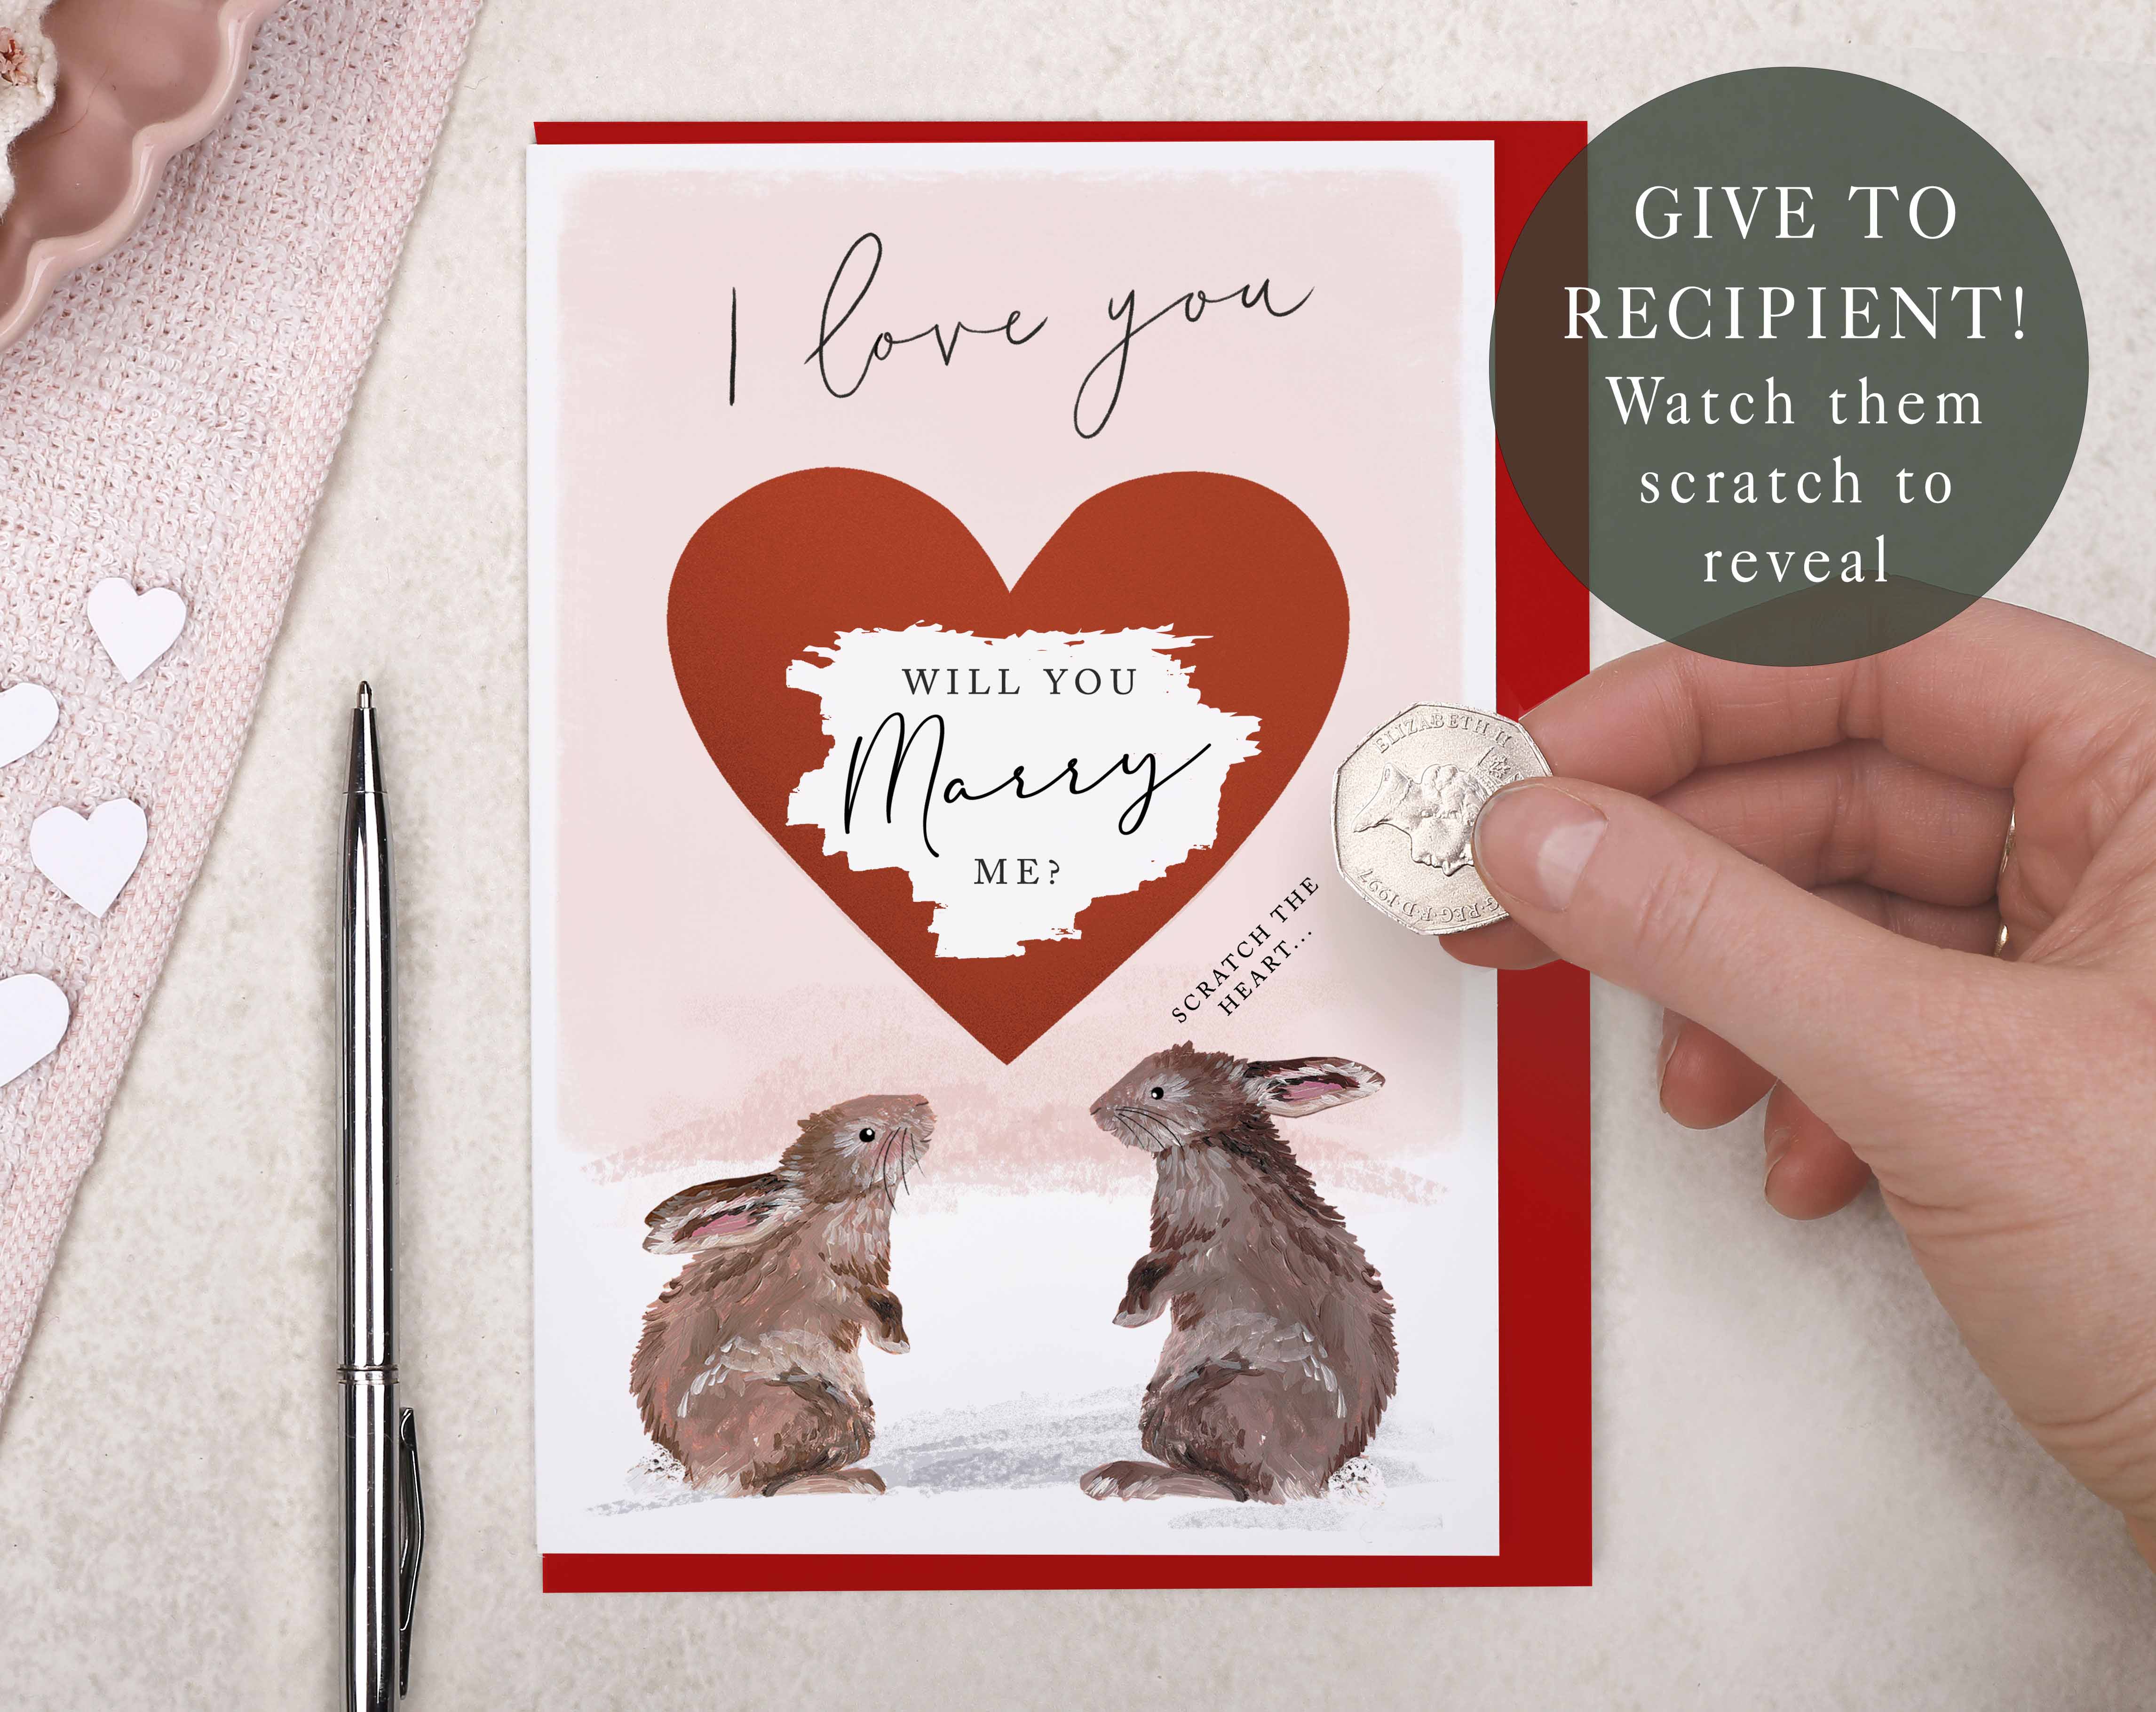 will you marry me' scratch to reveal proposal card